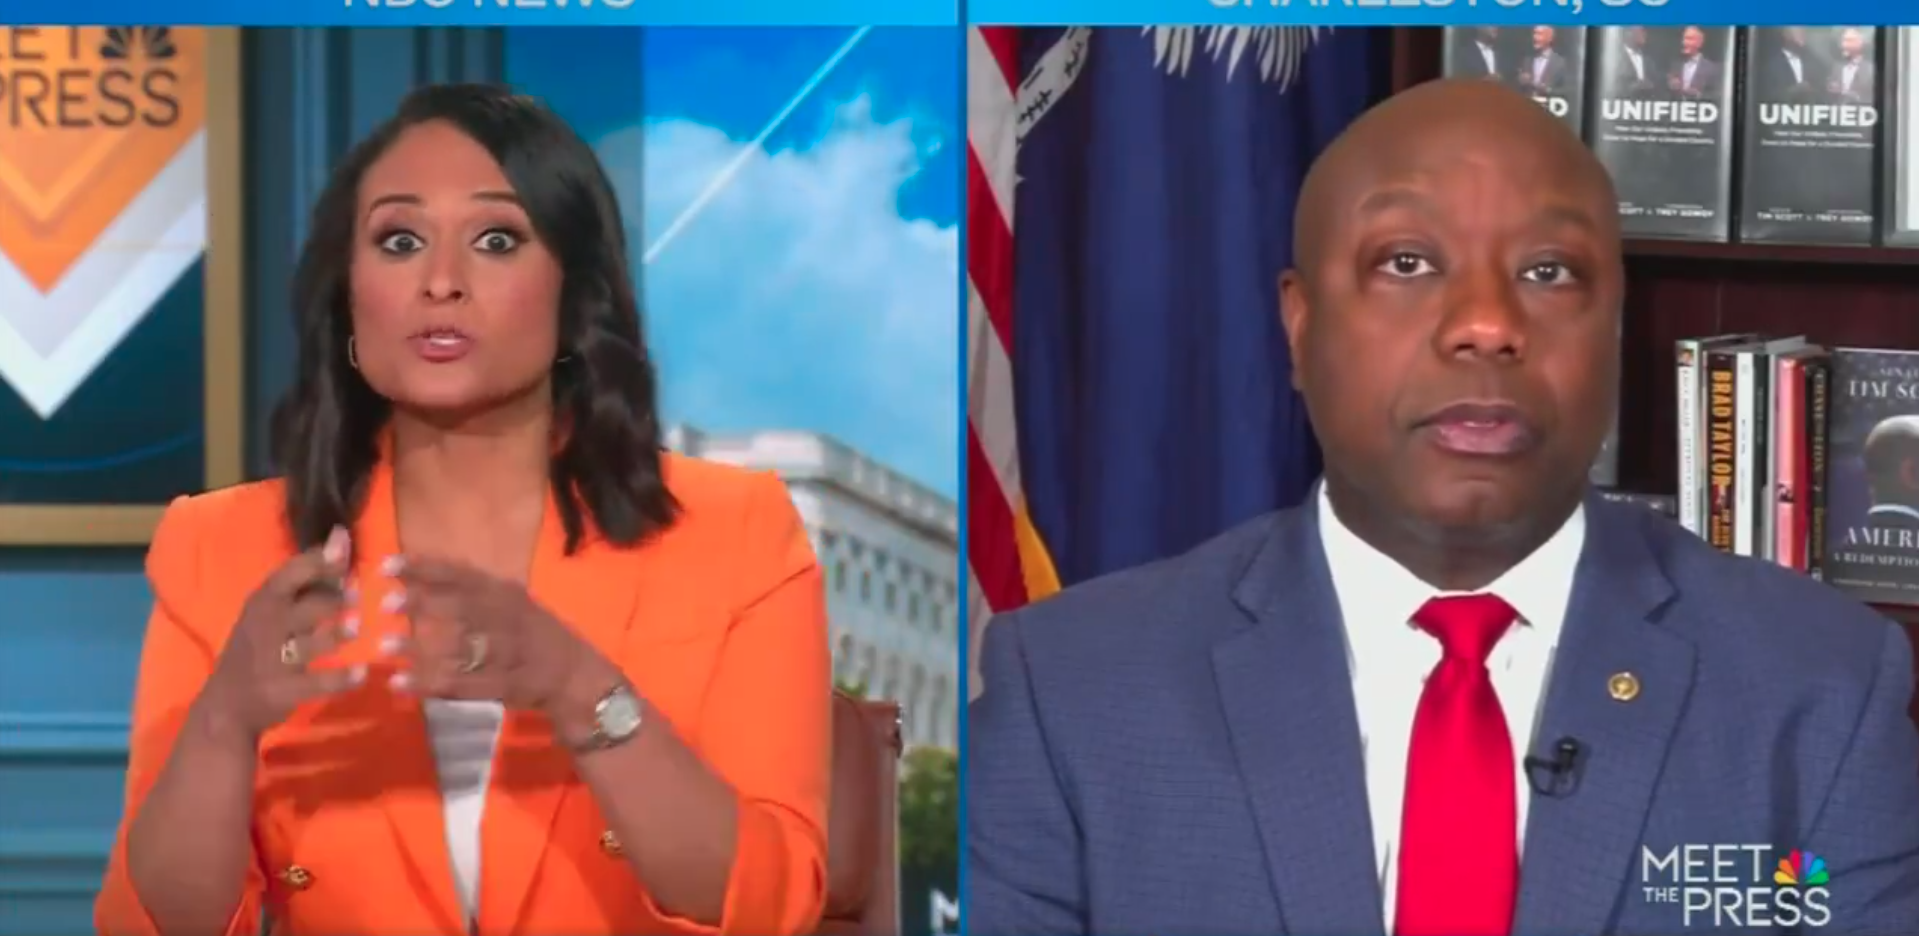 Tim Scott Repeatedly Pressed to Commit to Accept the 2024 Election Results